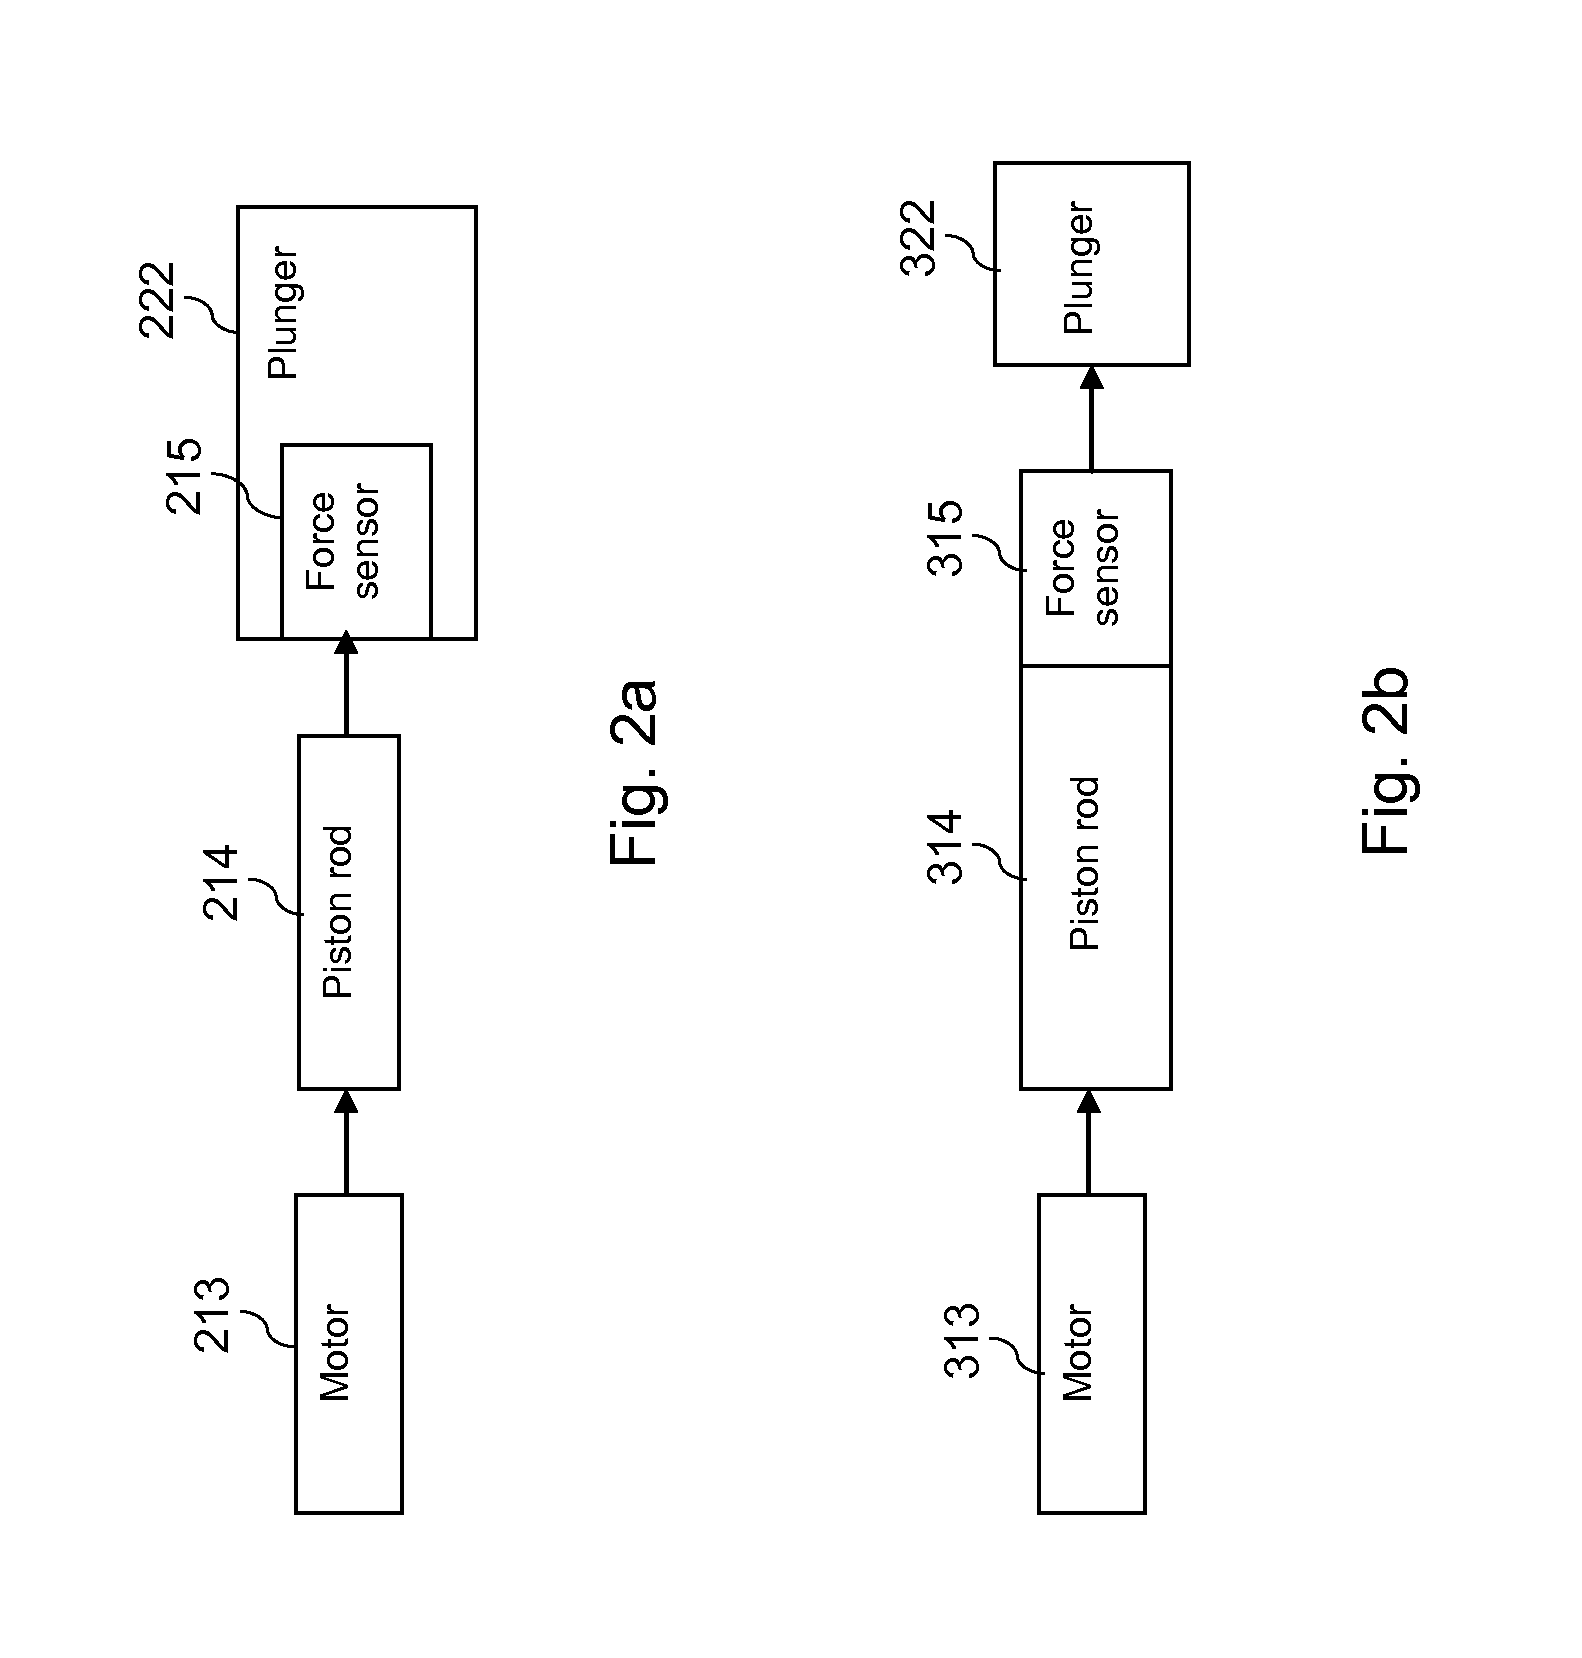 Controlling a motor of an injection device